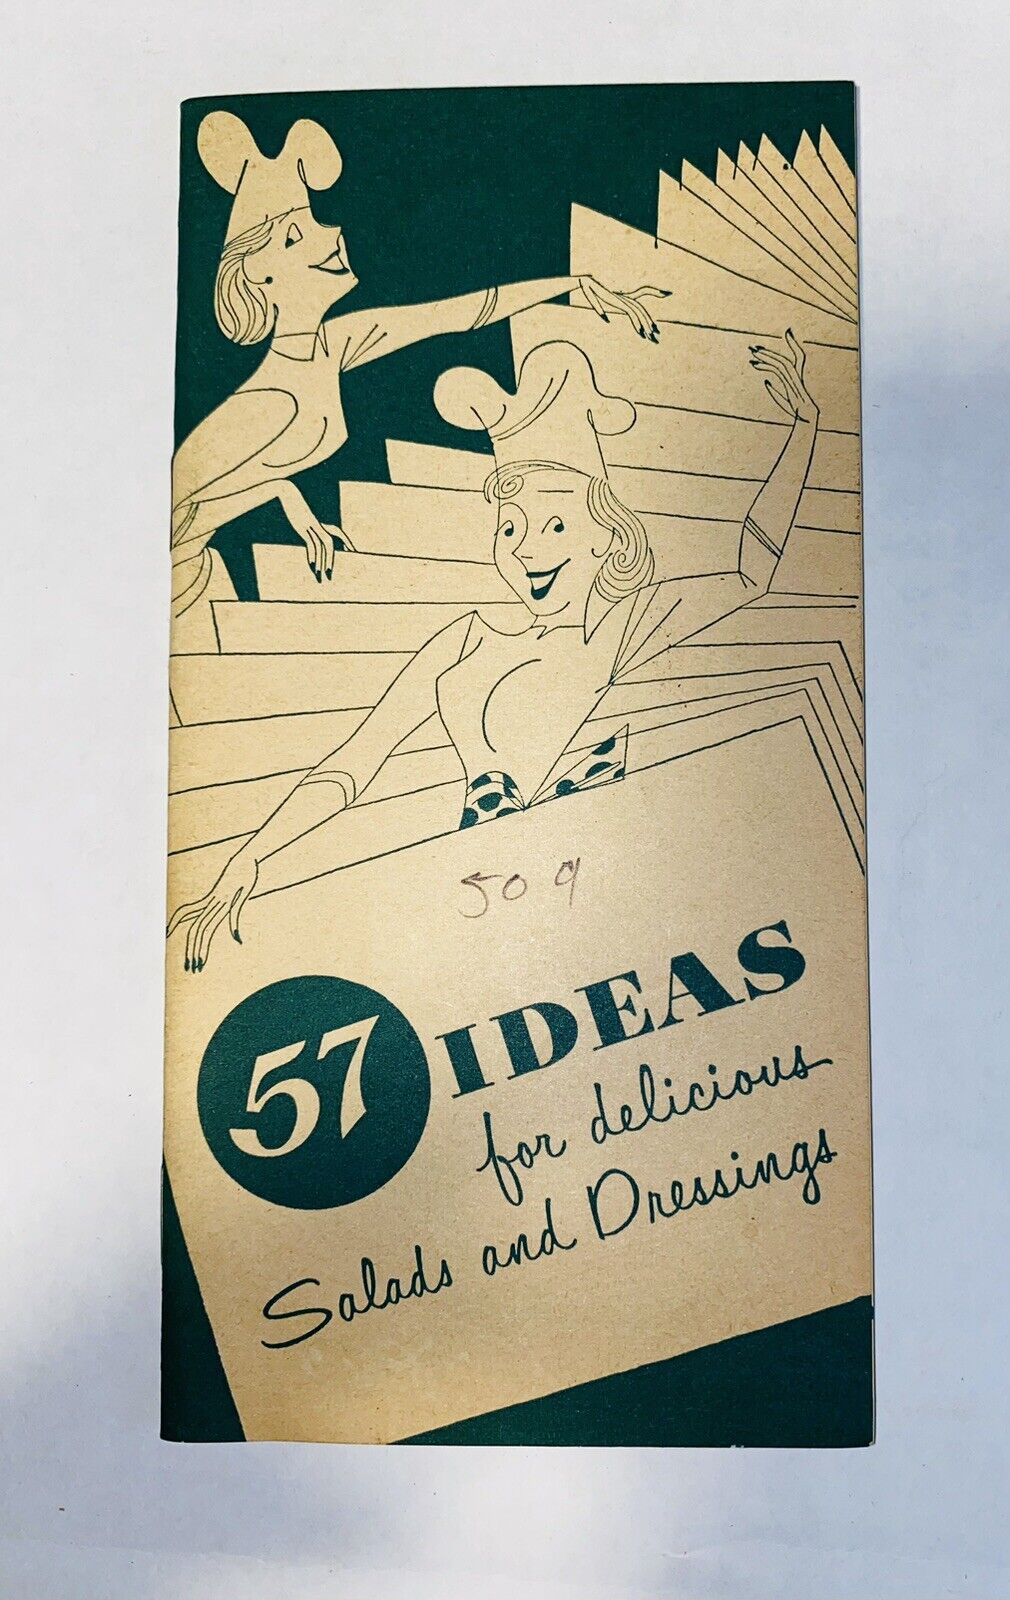 Vintage Heinz 57 Ideas For Delicious Salads And Dressings Recipe Book Pamphlet